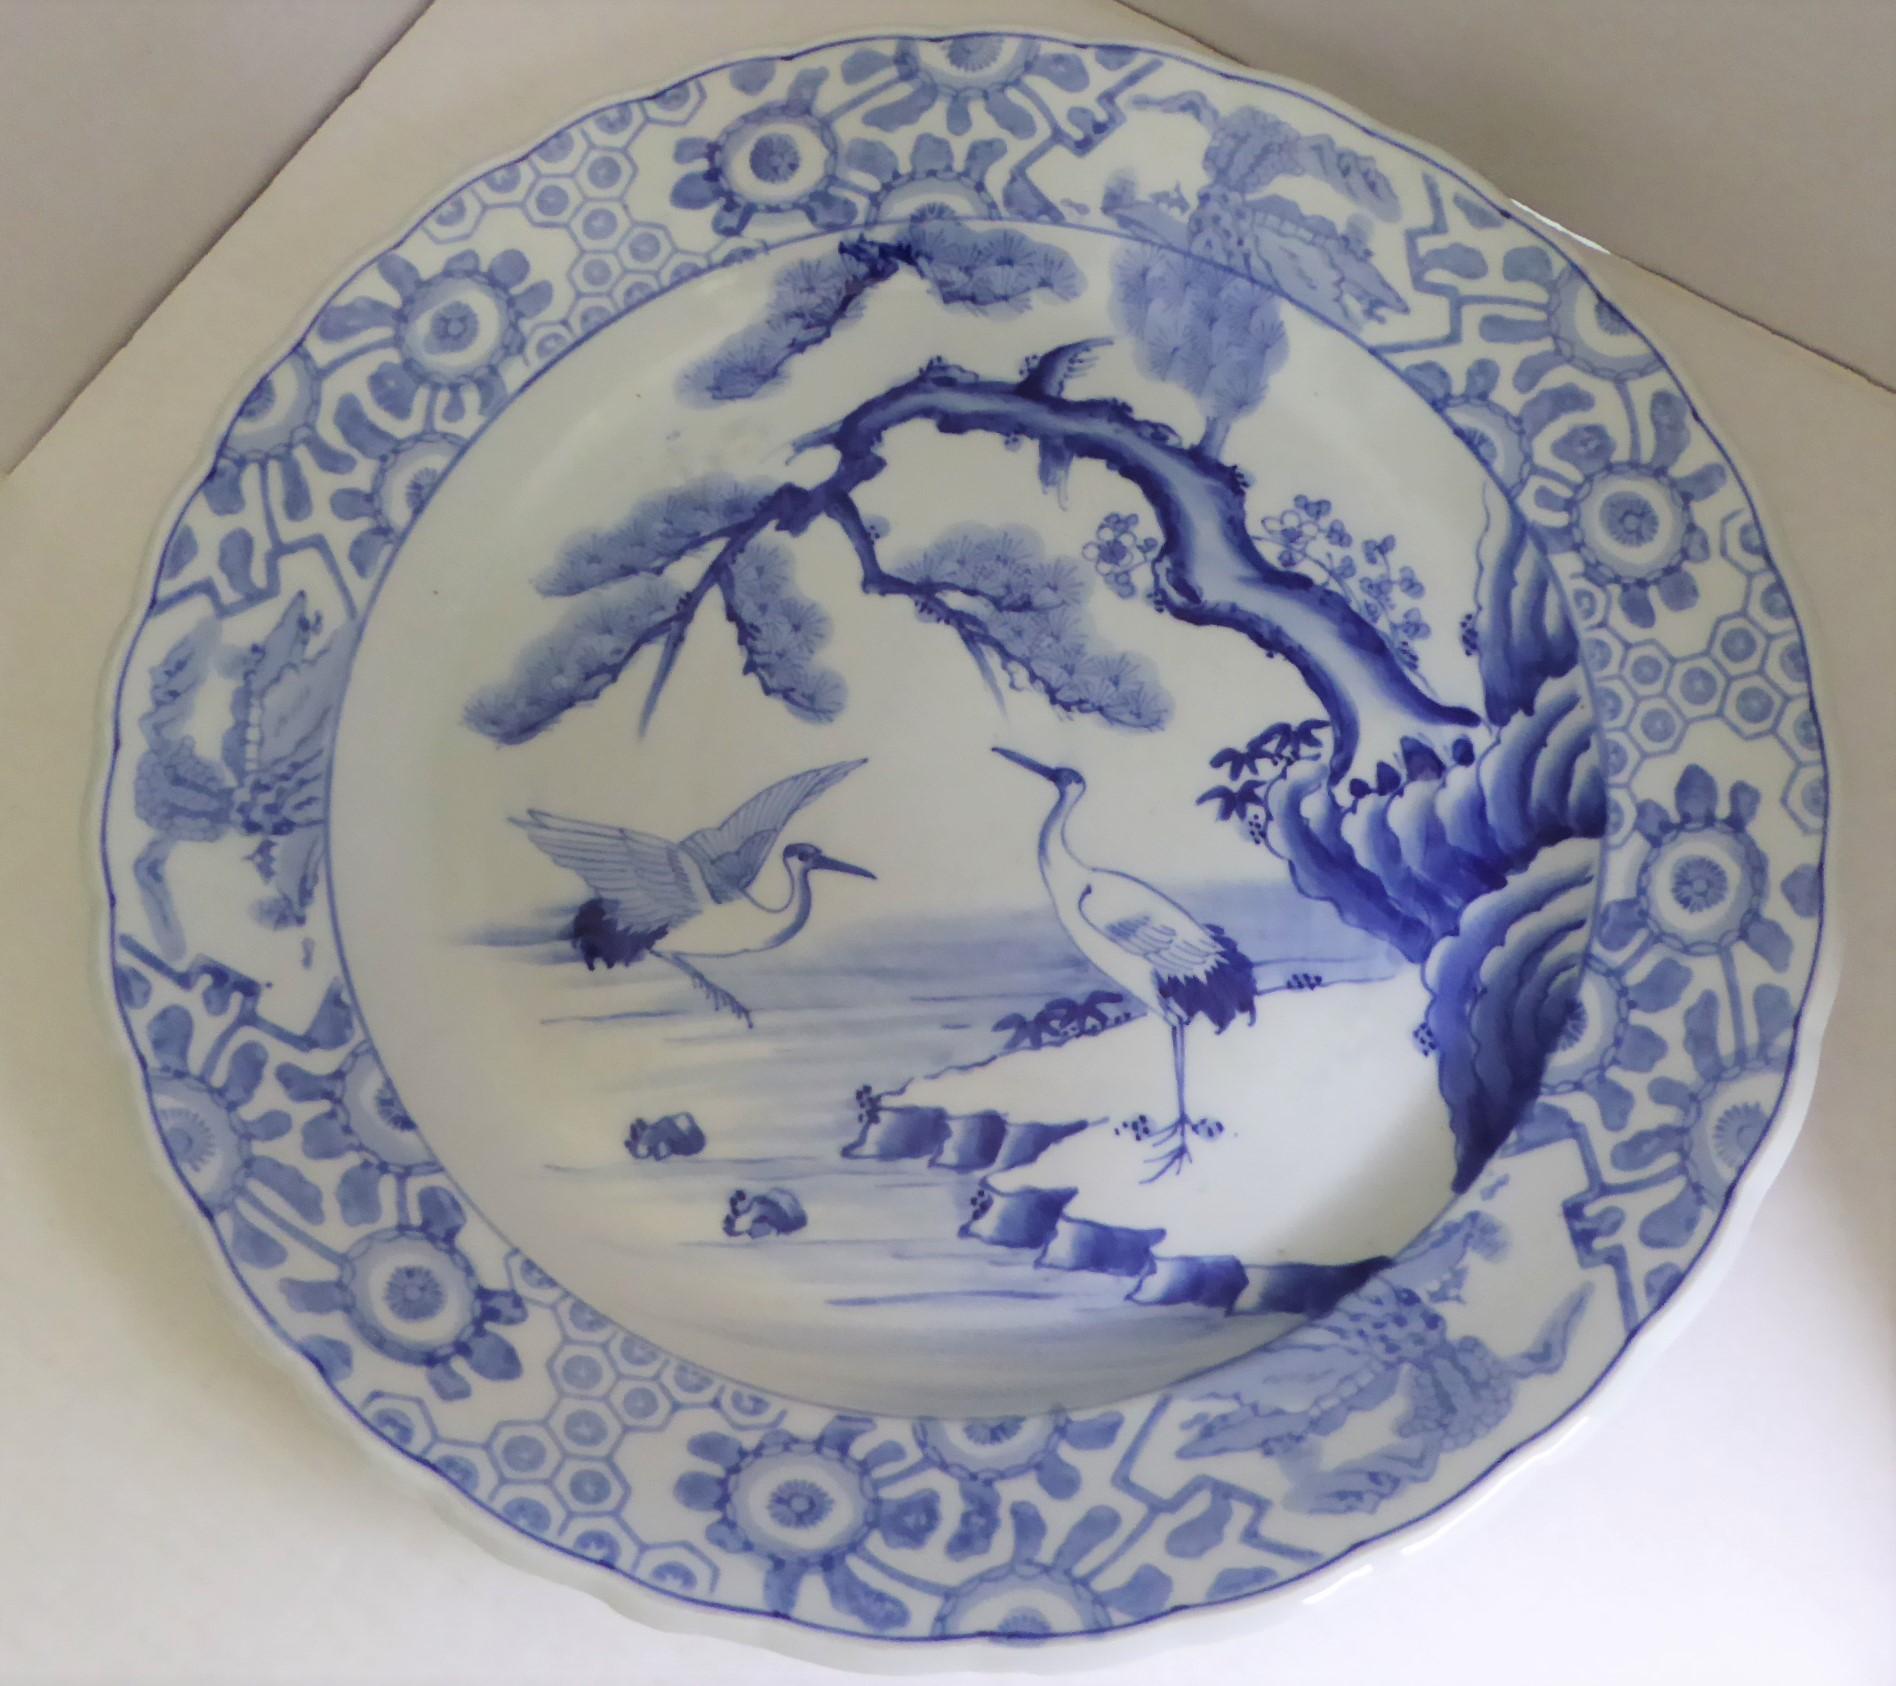 Beautiful Meiji period blue and white Japanese Imari Charger depicting a standing crane or stork under a pine tree at water's edge and another coming back for a landing. Two stylized turtles are seen swimming nearby. Rim decorated with 3 medallions